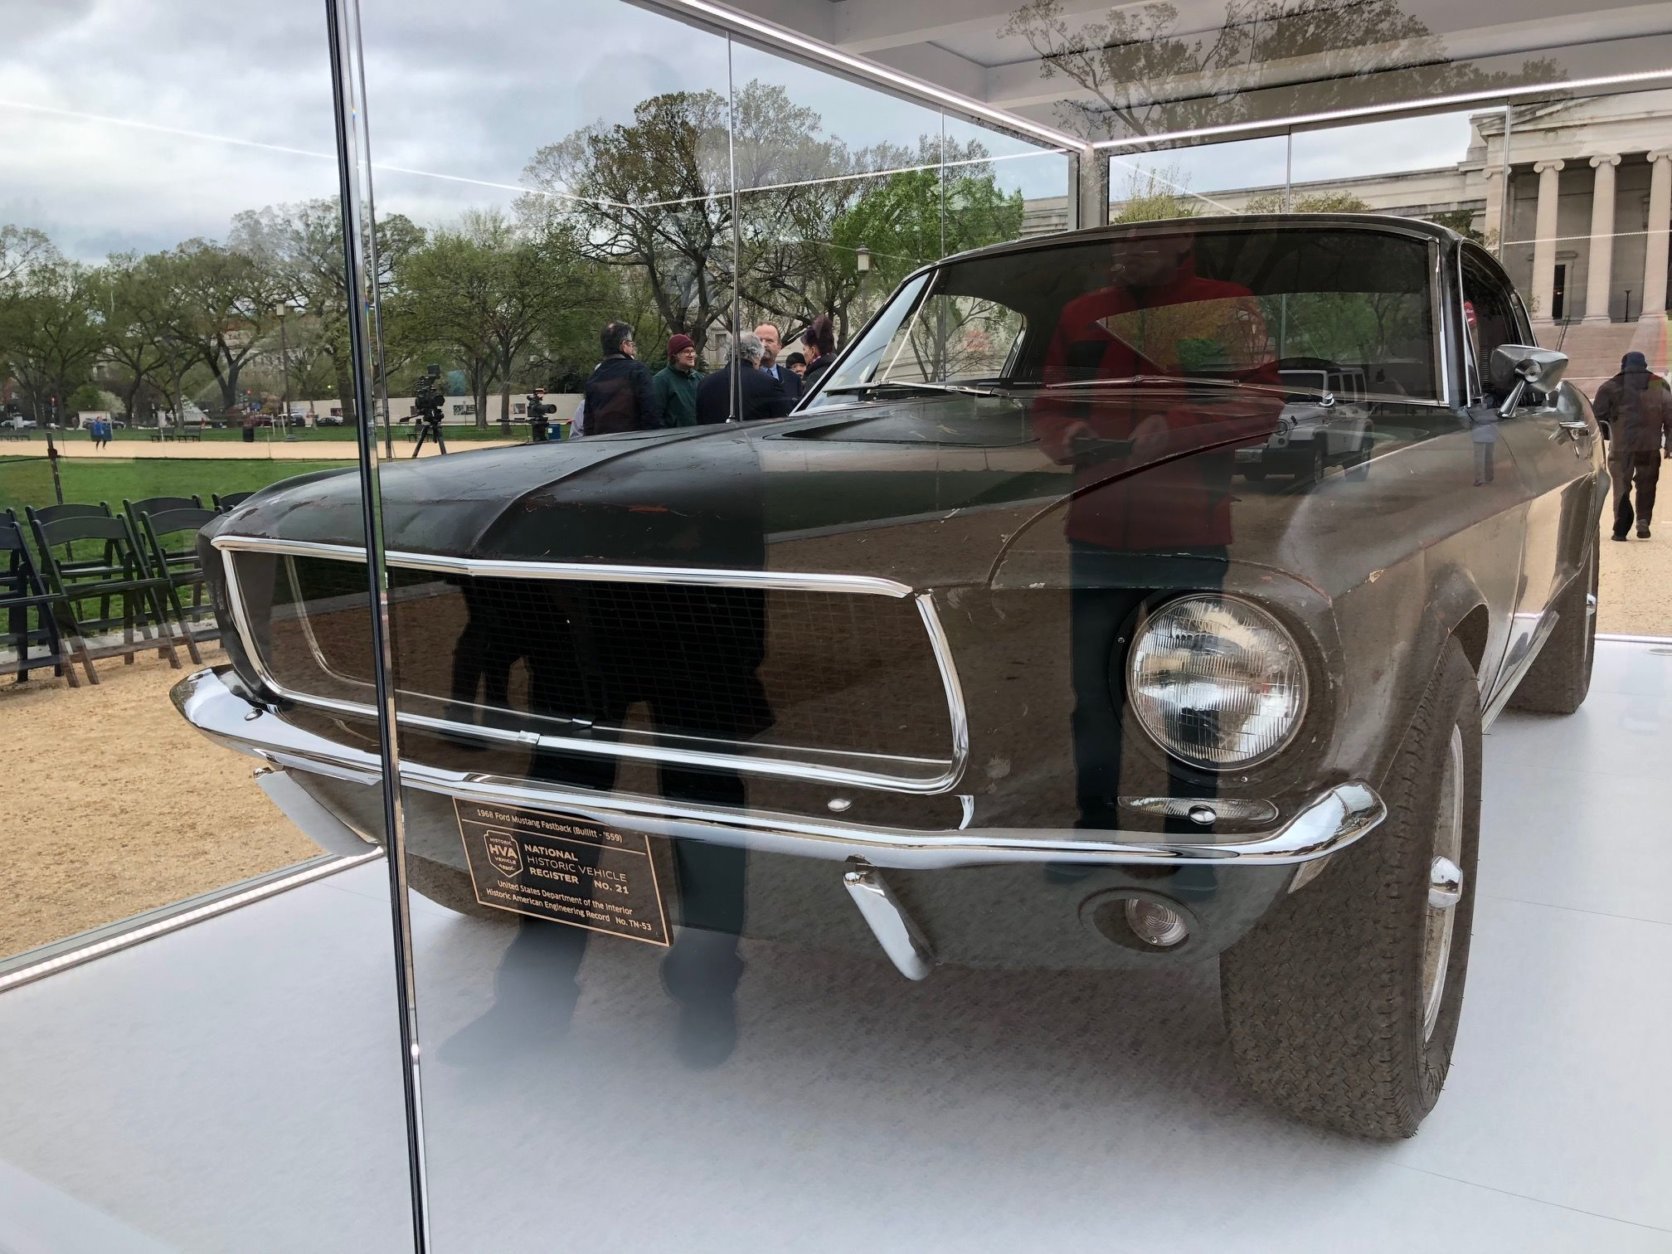 This week, the original 1968 Mustang from the action flick "Bullitt" (1968) with Steve McQueen is on display on the National Mall marking National Mustang Day on Tuesday and staying on display through Sunday as part of a weeklong event, sponsored by the Historic Vehicle Association. (WTOP/John Aaron)